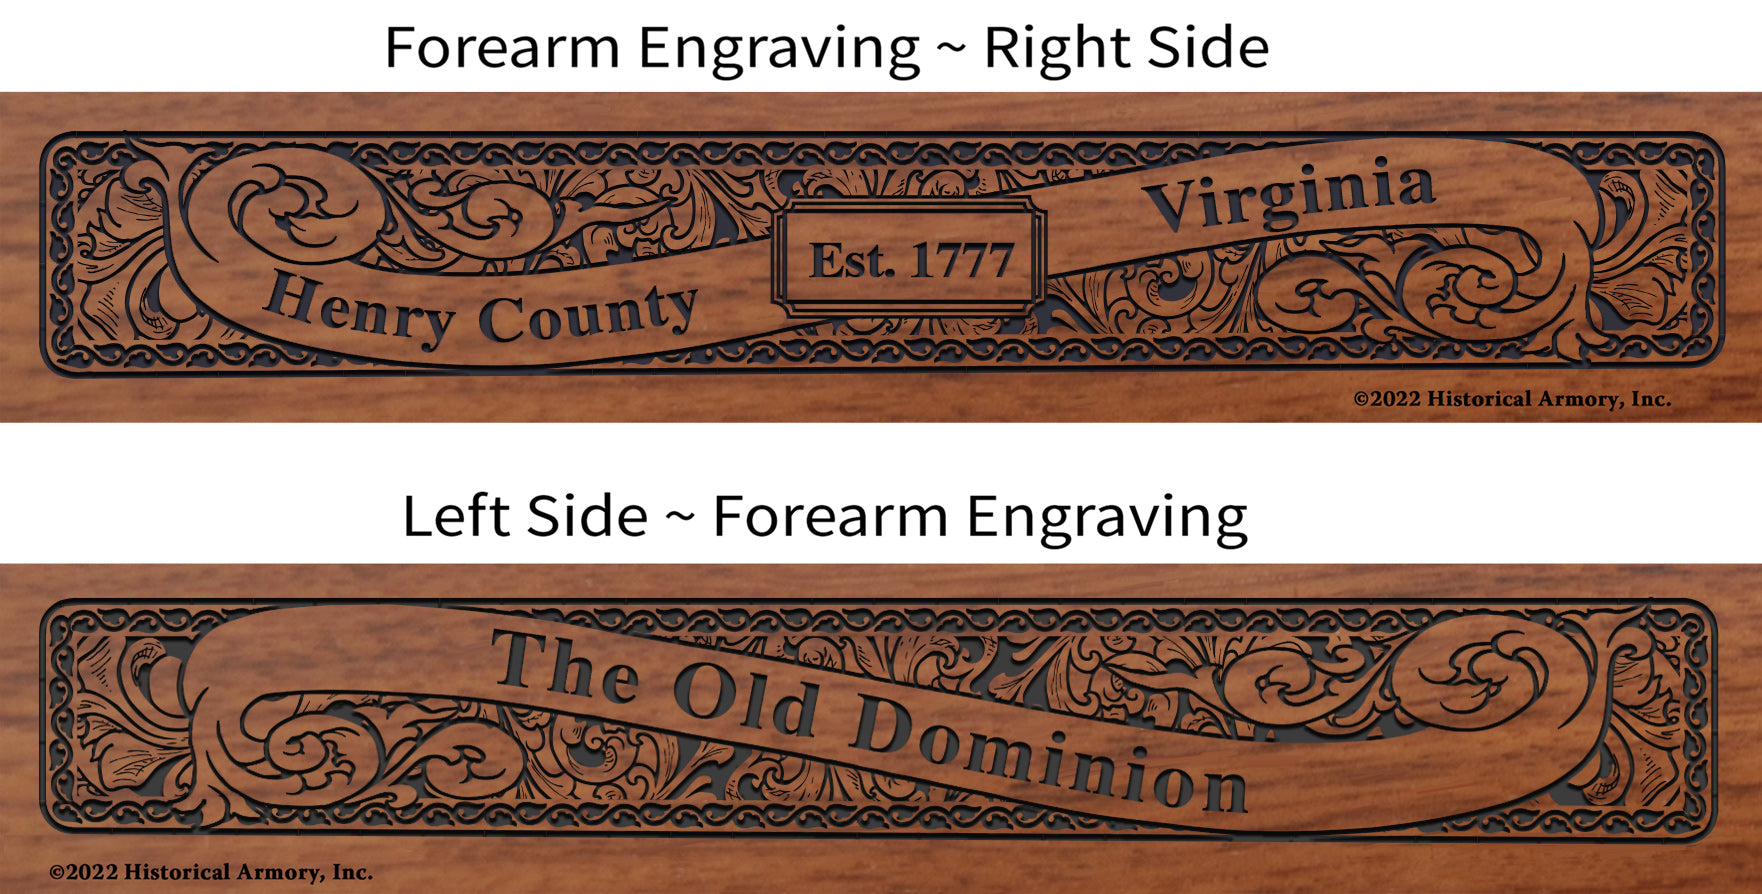 Henry County Virginia Engraved Rifle Forearm